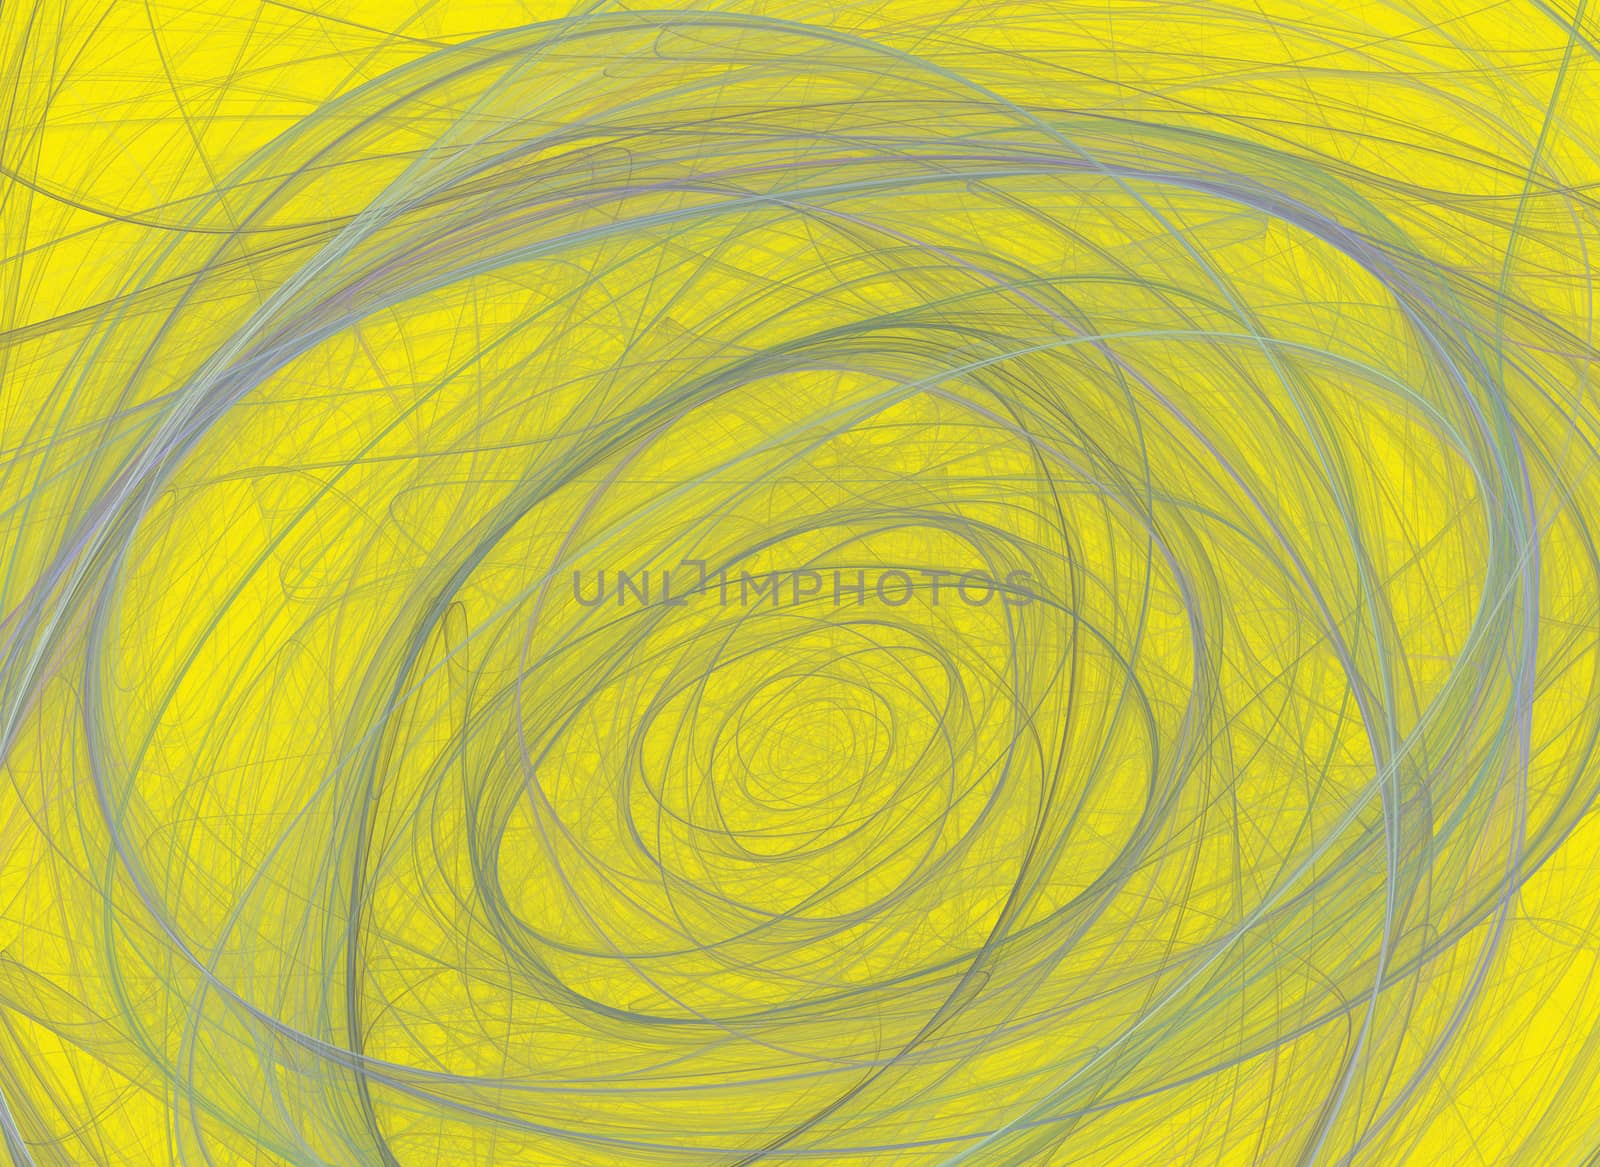  abstract fractal pattern on yellow background by Chechotkin